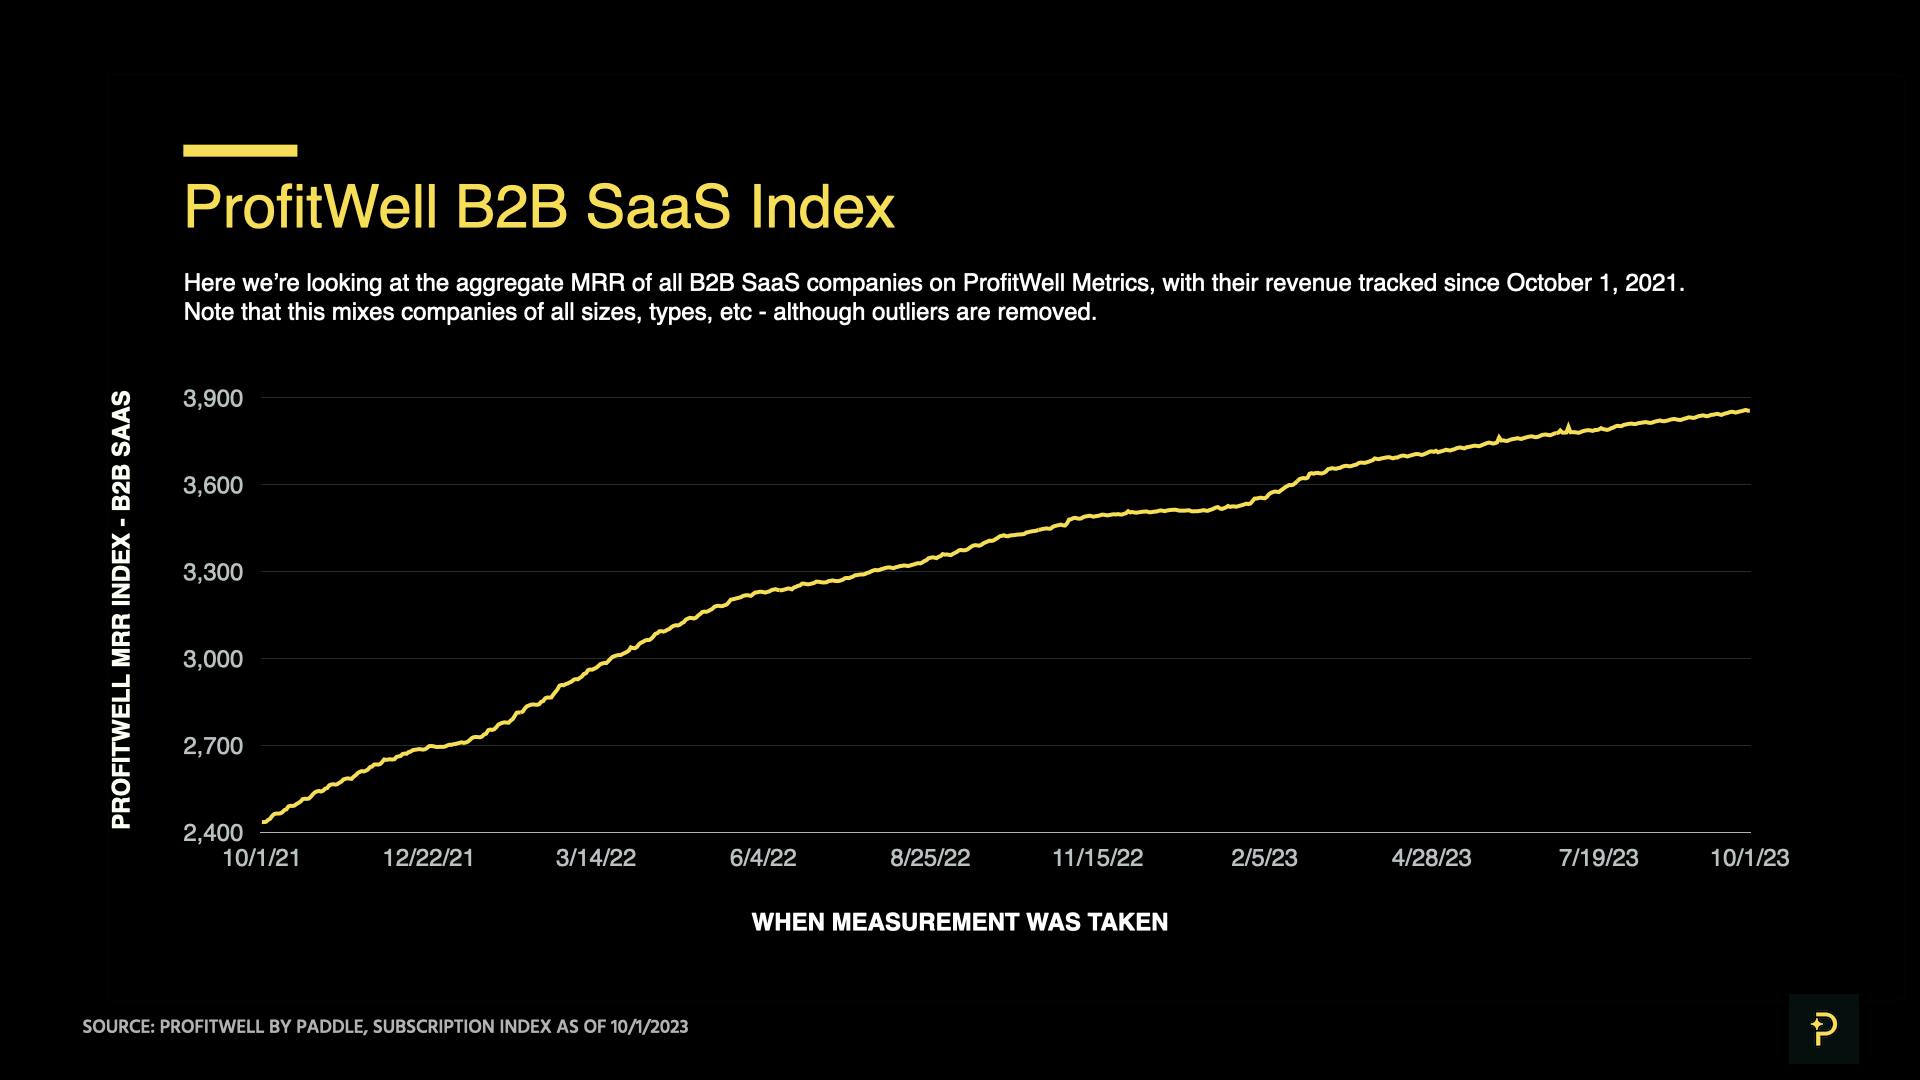 ProfitWell B2B SaaS Index as of October 1, 2023 - MRR over time